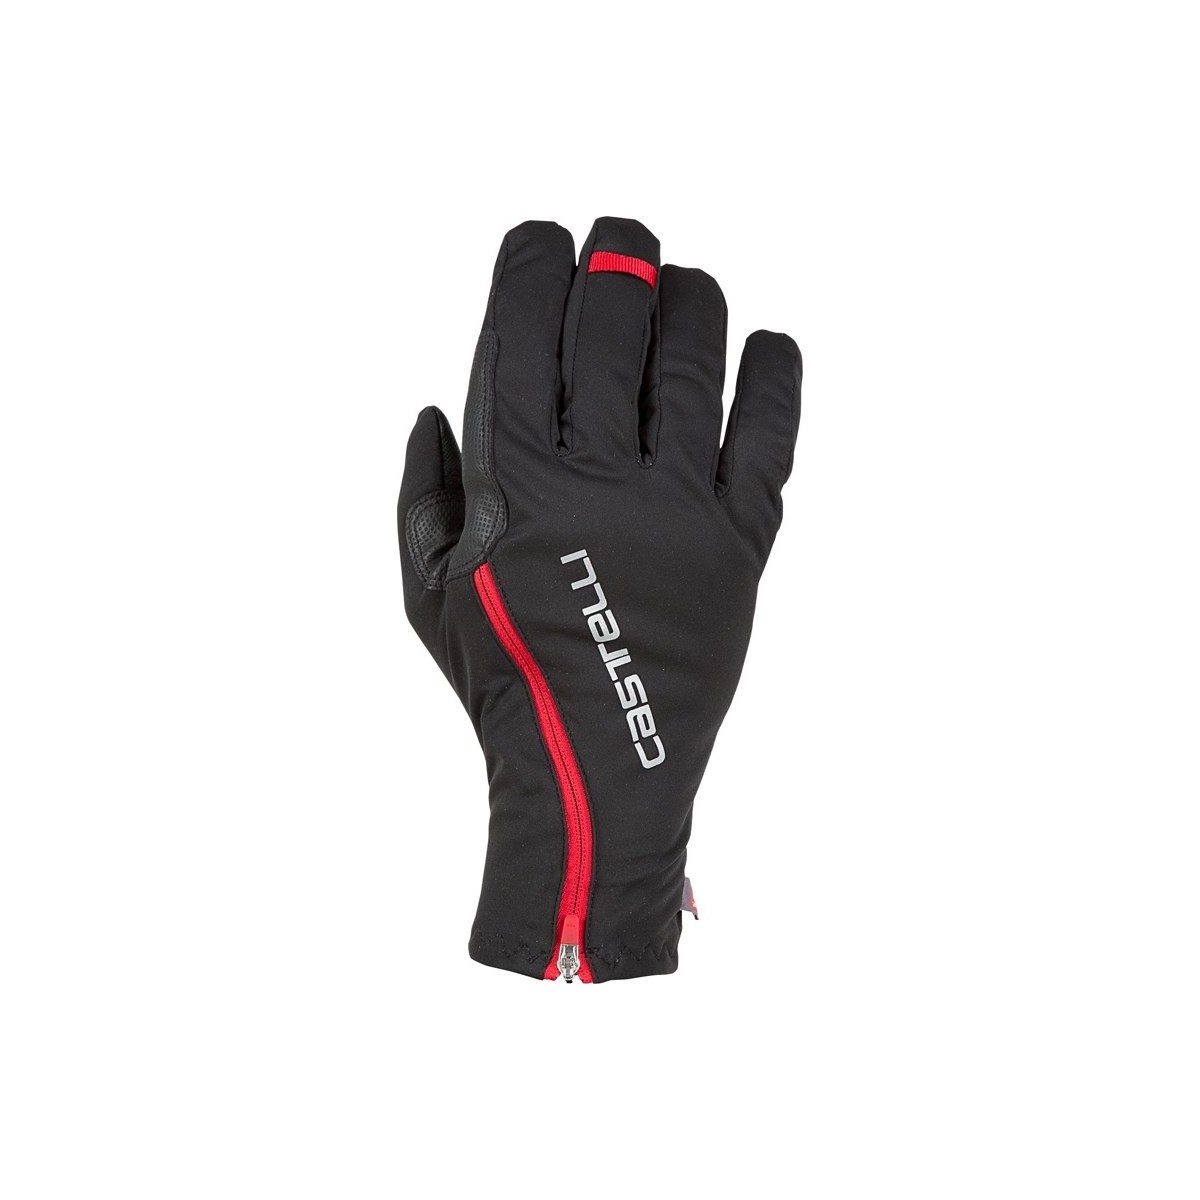 CASTELLI SPETTACOLO ROS long gloves - black